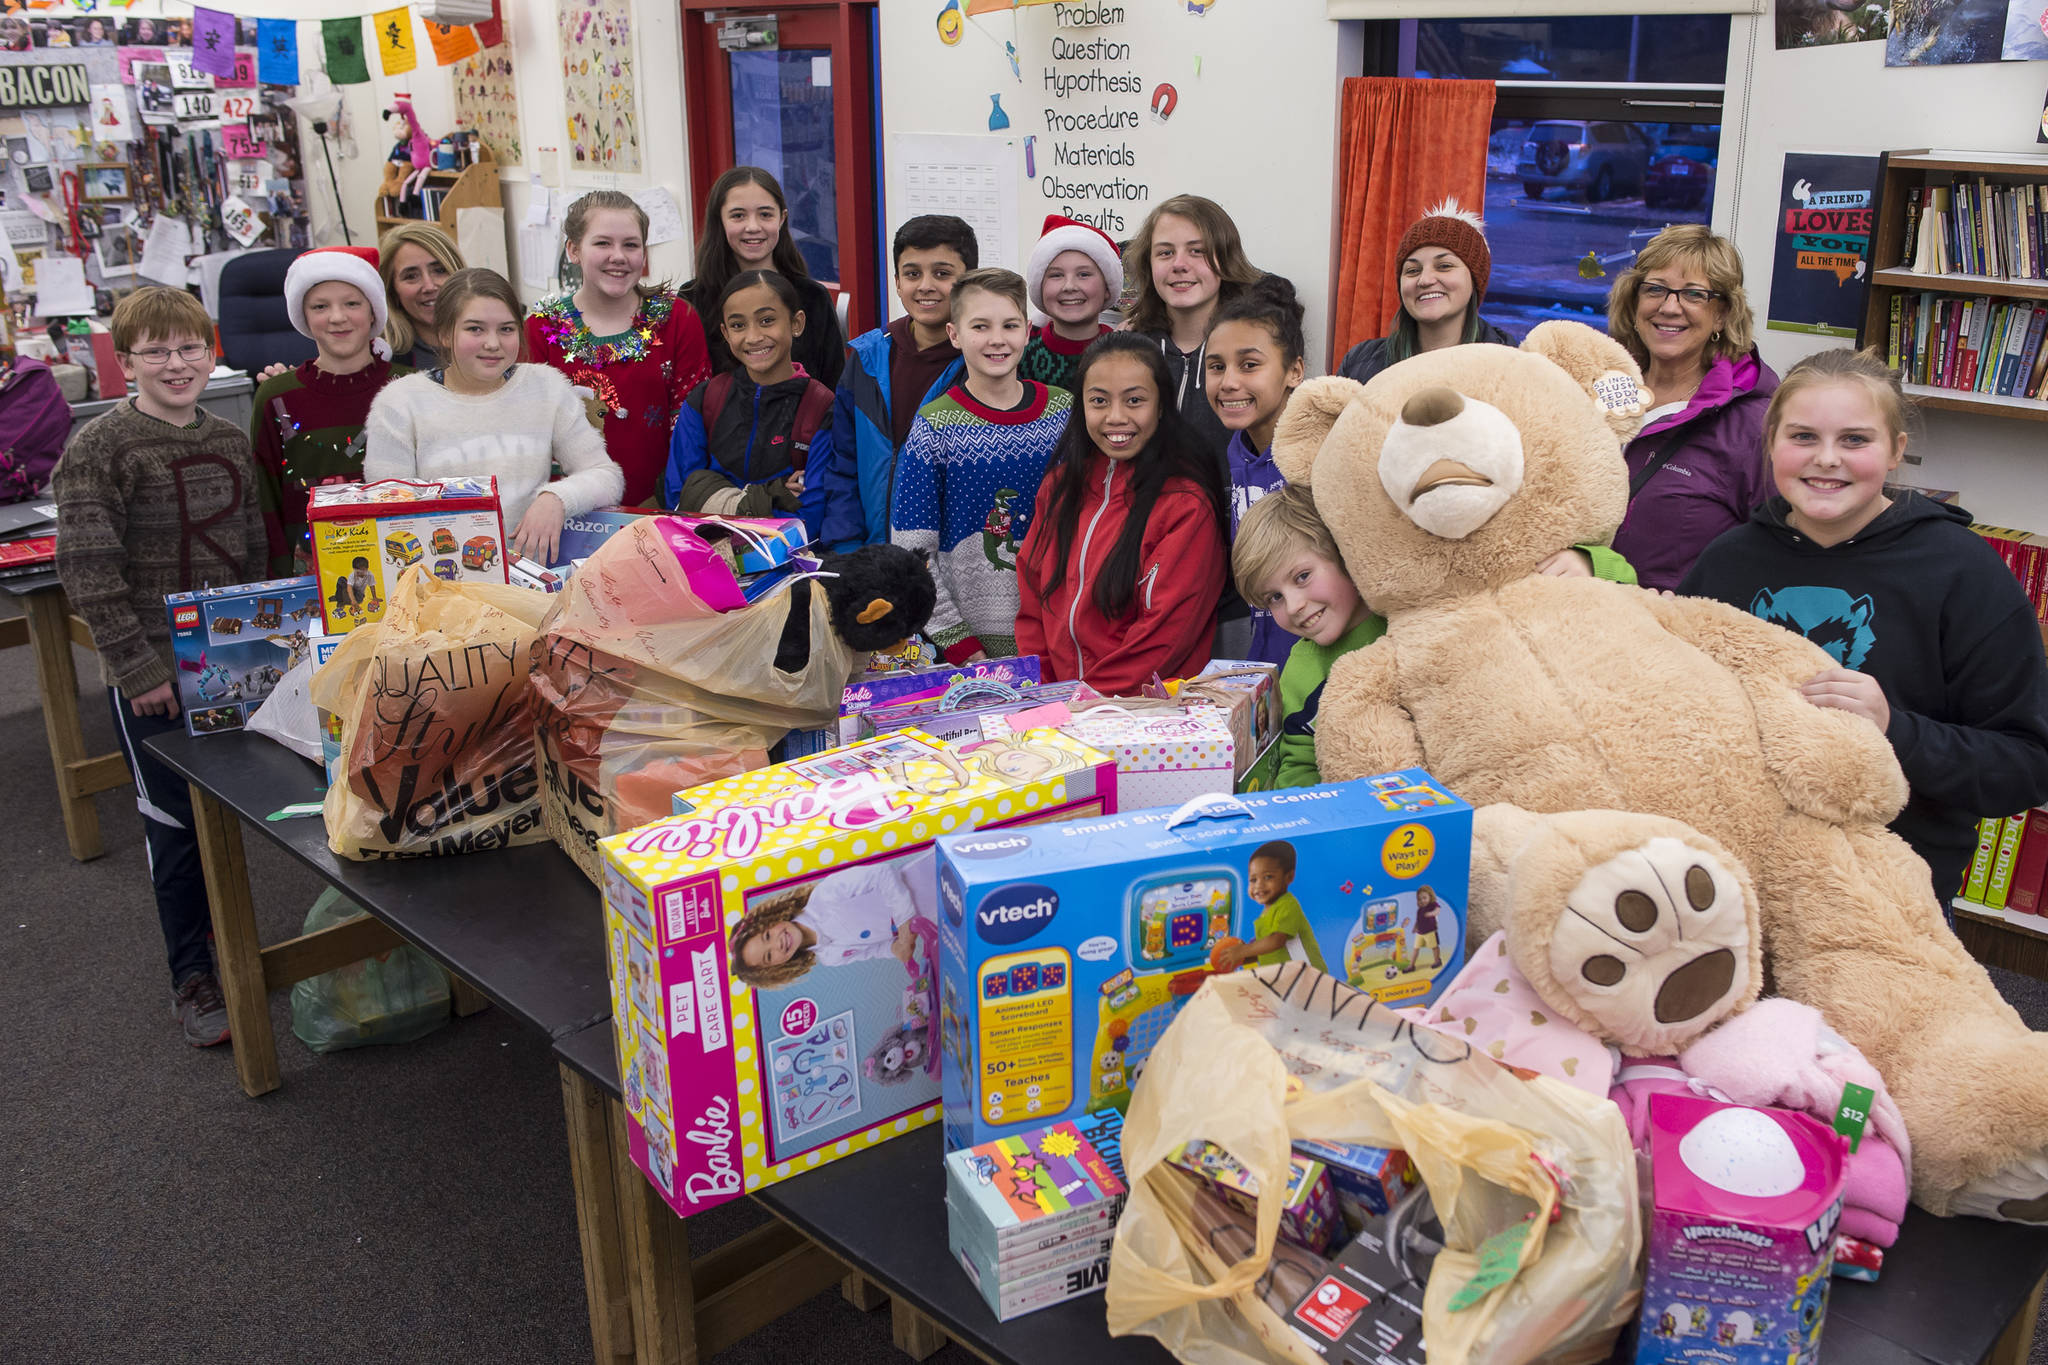 Floyd Dryden Middle School student council members gather around toys collected during a drive for Christmas presents to children in need at FDMS on Monday, Dec. 17, 2018. The toys and gift cards were handed over to the Alaska Department of Health and Social Services’ Office of Children Services for distribution. (Michael Penn | Juneau Empire)